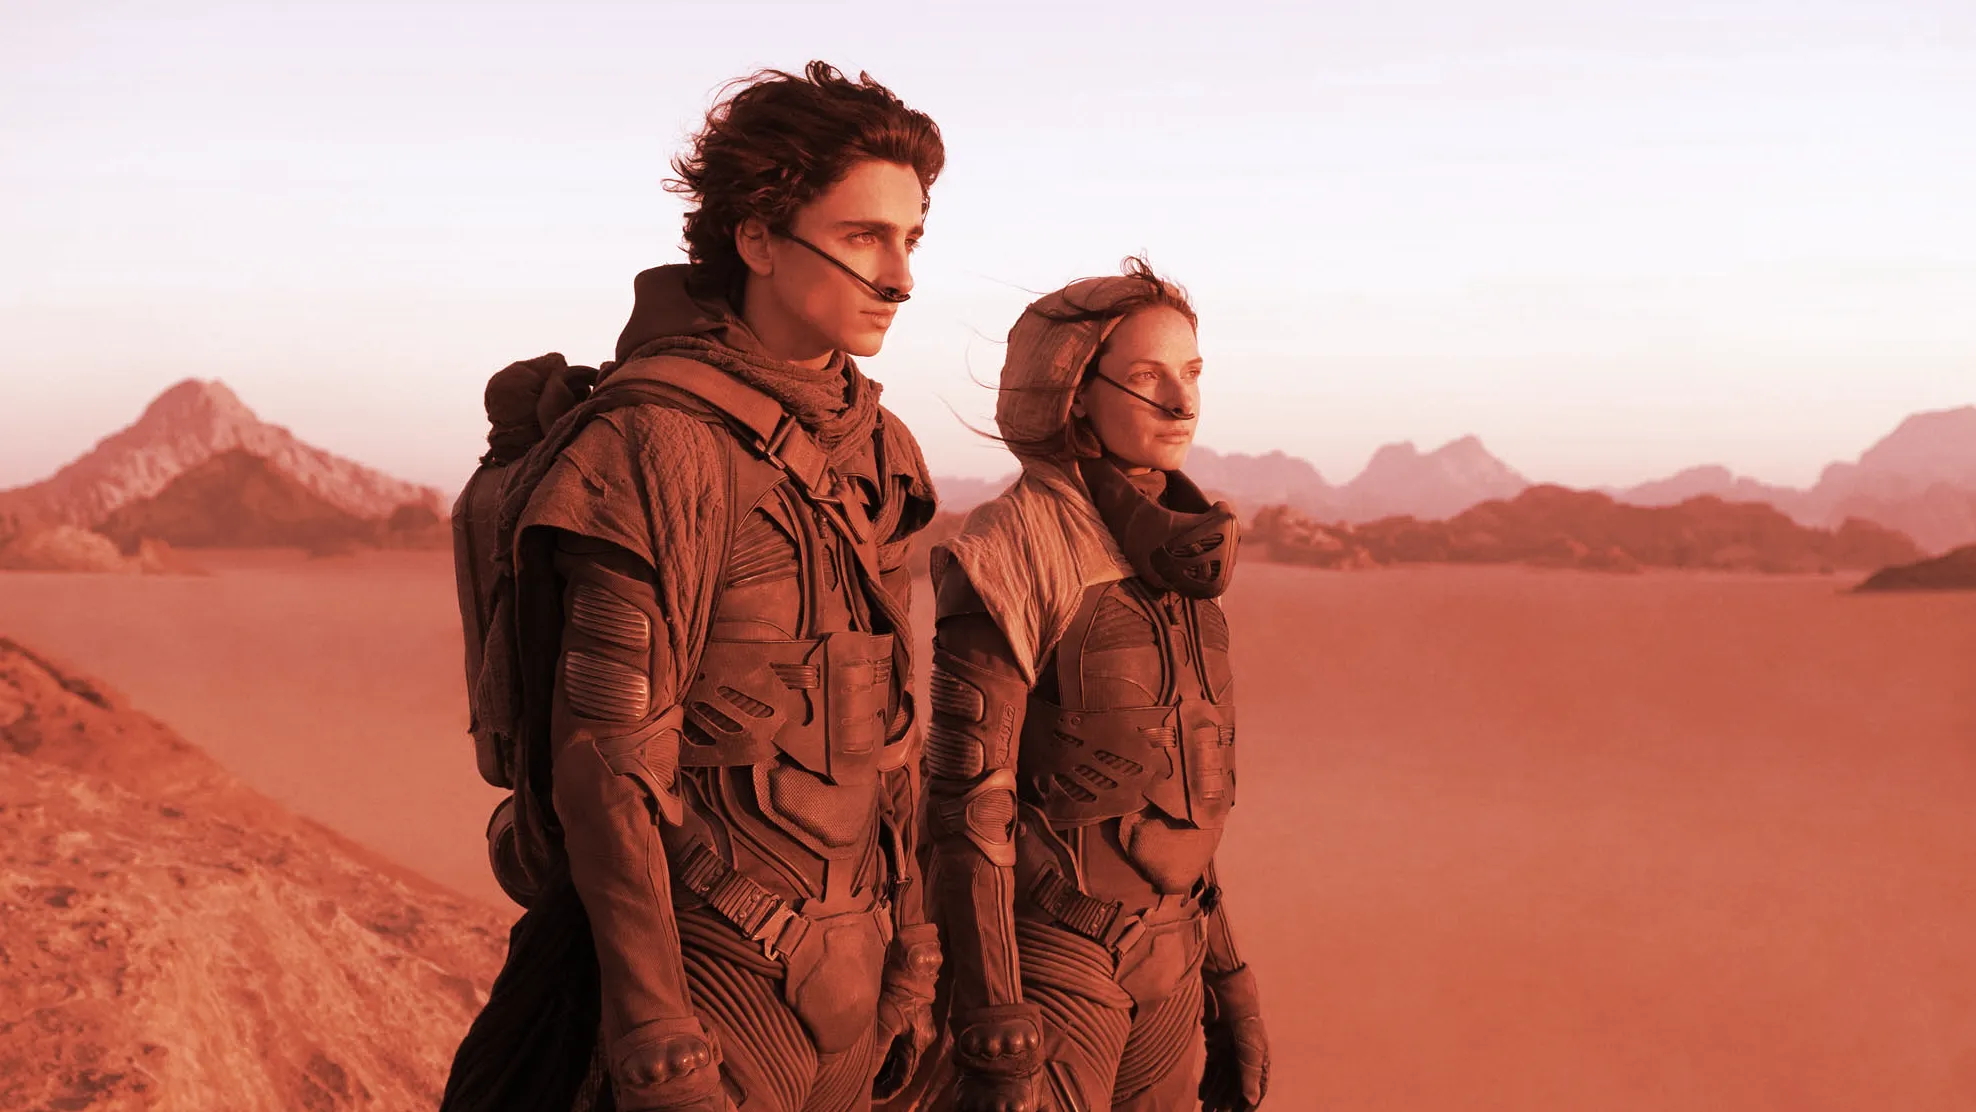 "Dune" is a film based on a classic sci-fi novel. Image: Legendary Pictures